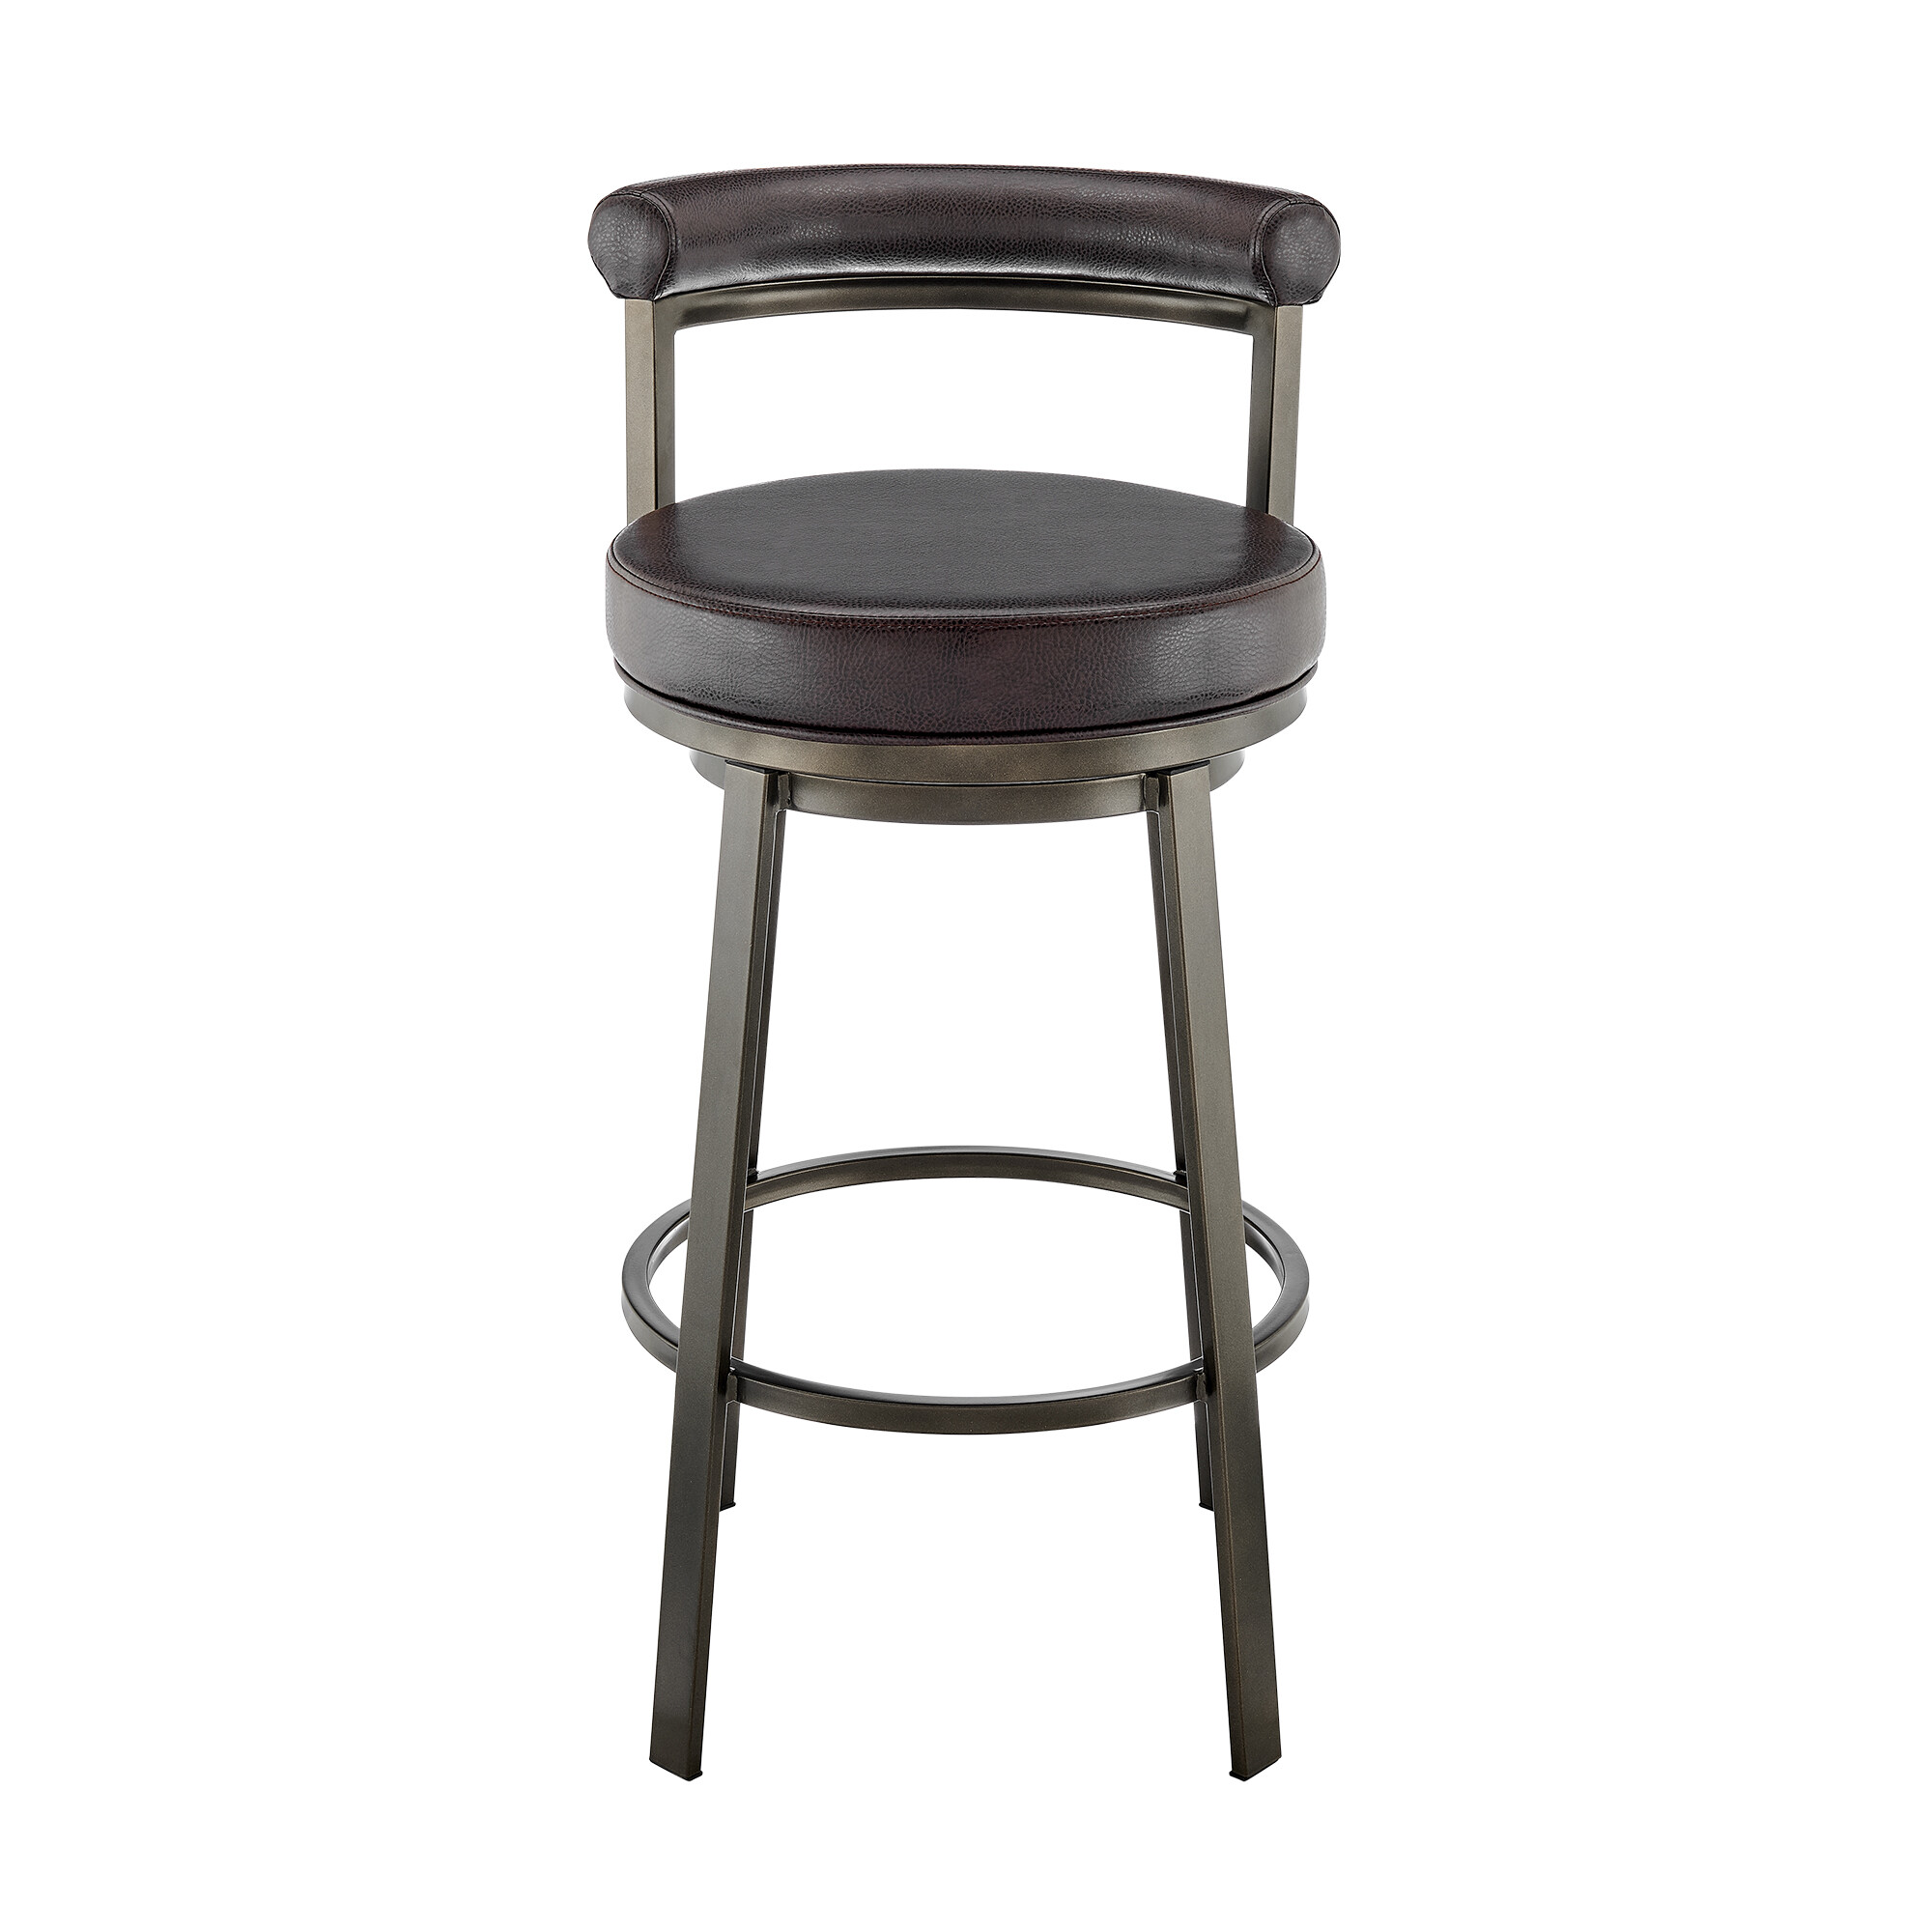 Neura Swivel Counter or Bar Stool in Mocha Finish with Brown Faux Leather